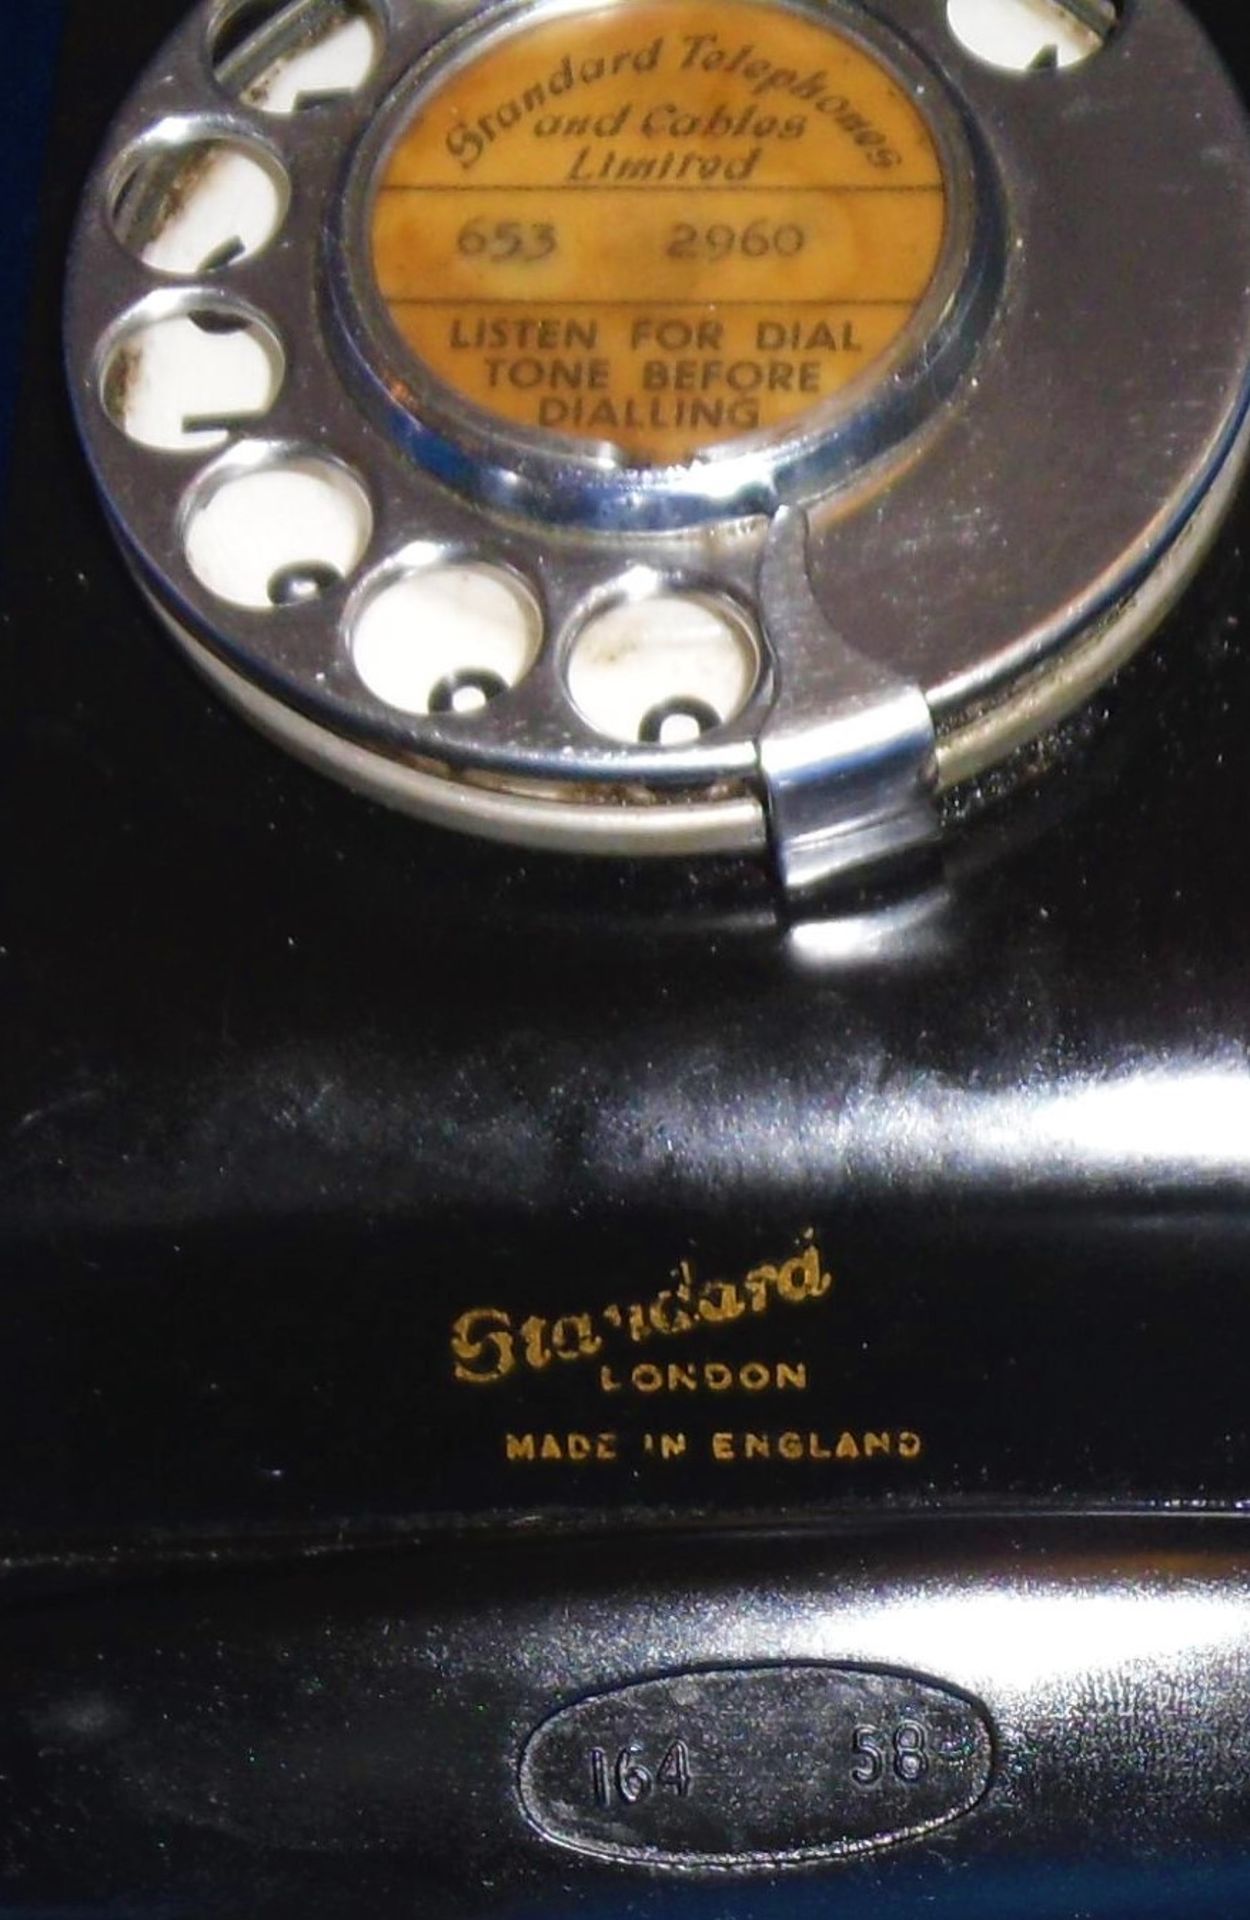 Vintage Bakelite Telephone Standard Telephone and Cables Limited 1958 - Image 4 of 8